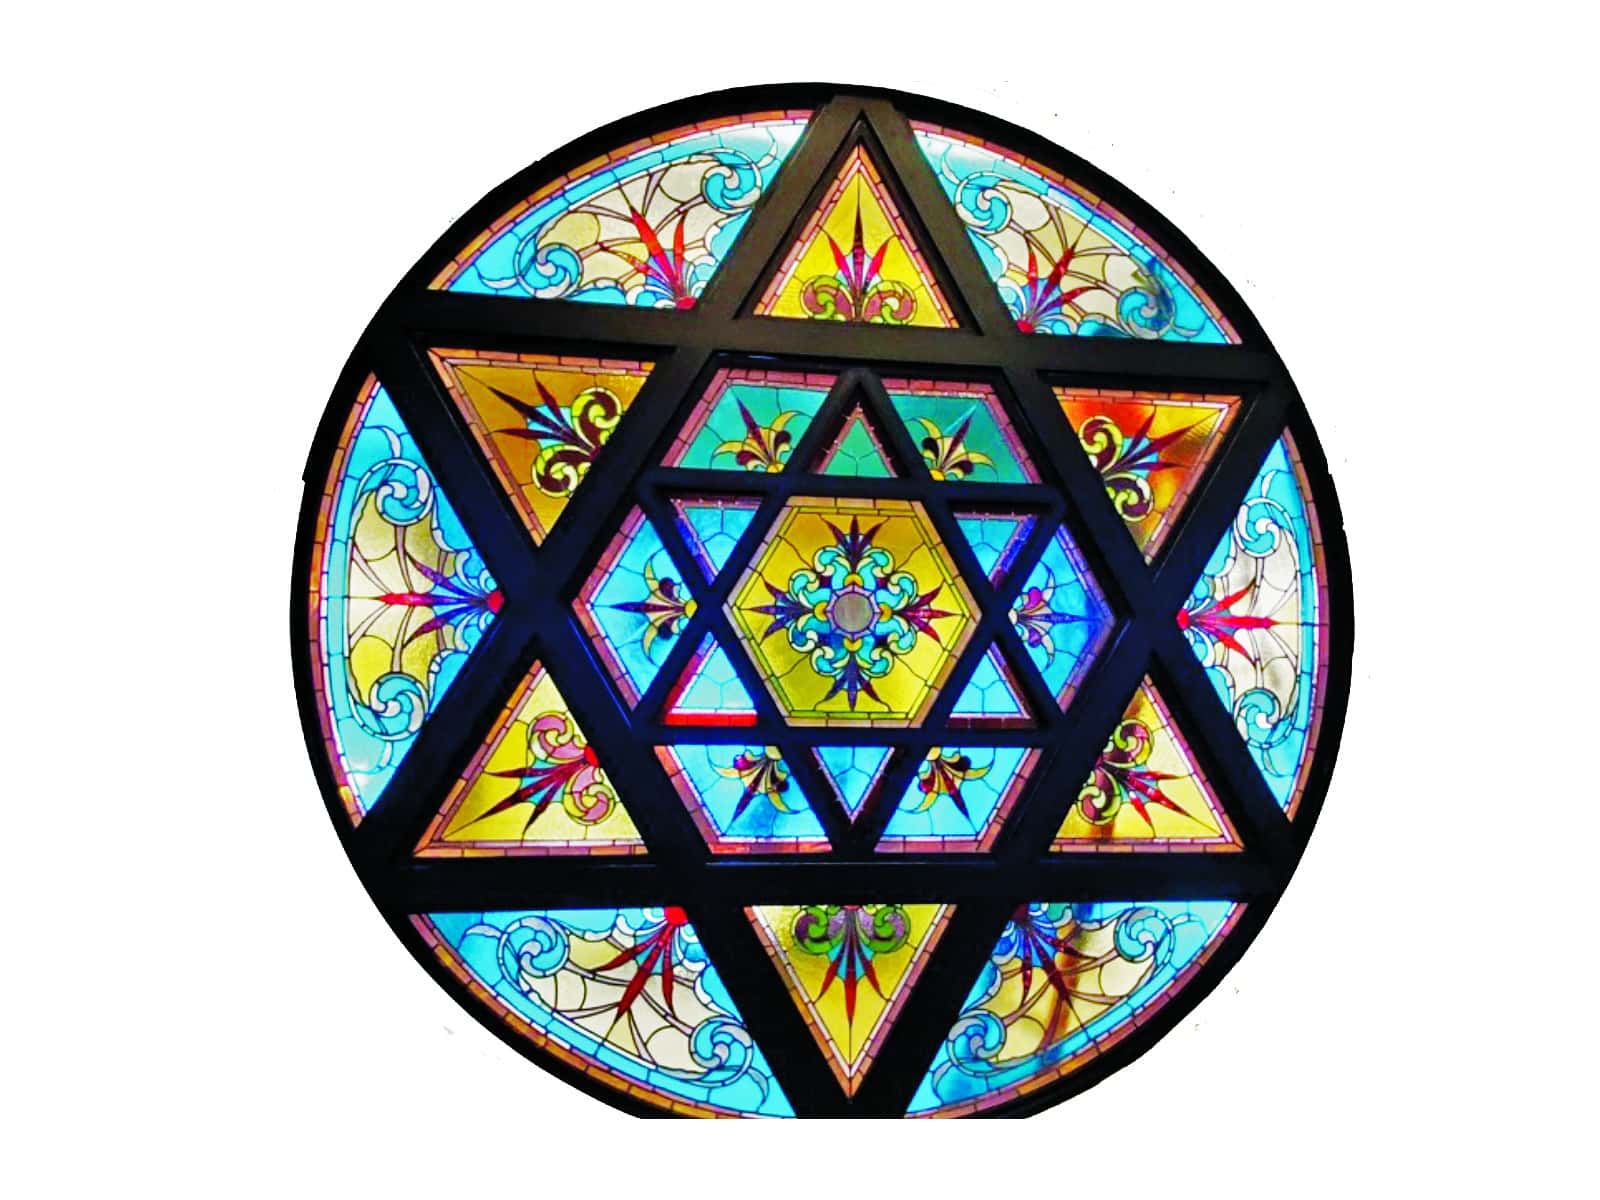 Star of David inside another made from stained glass